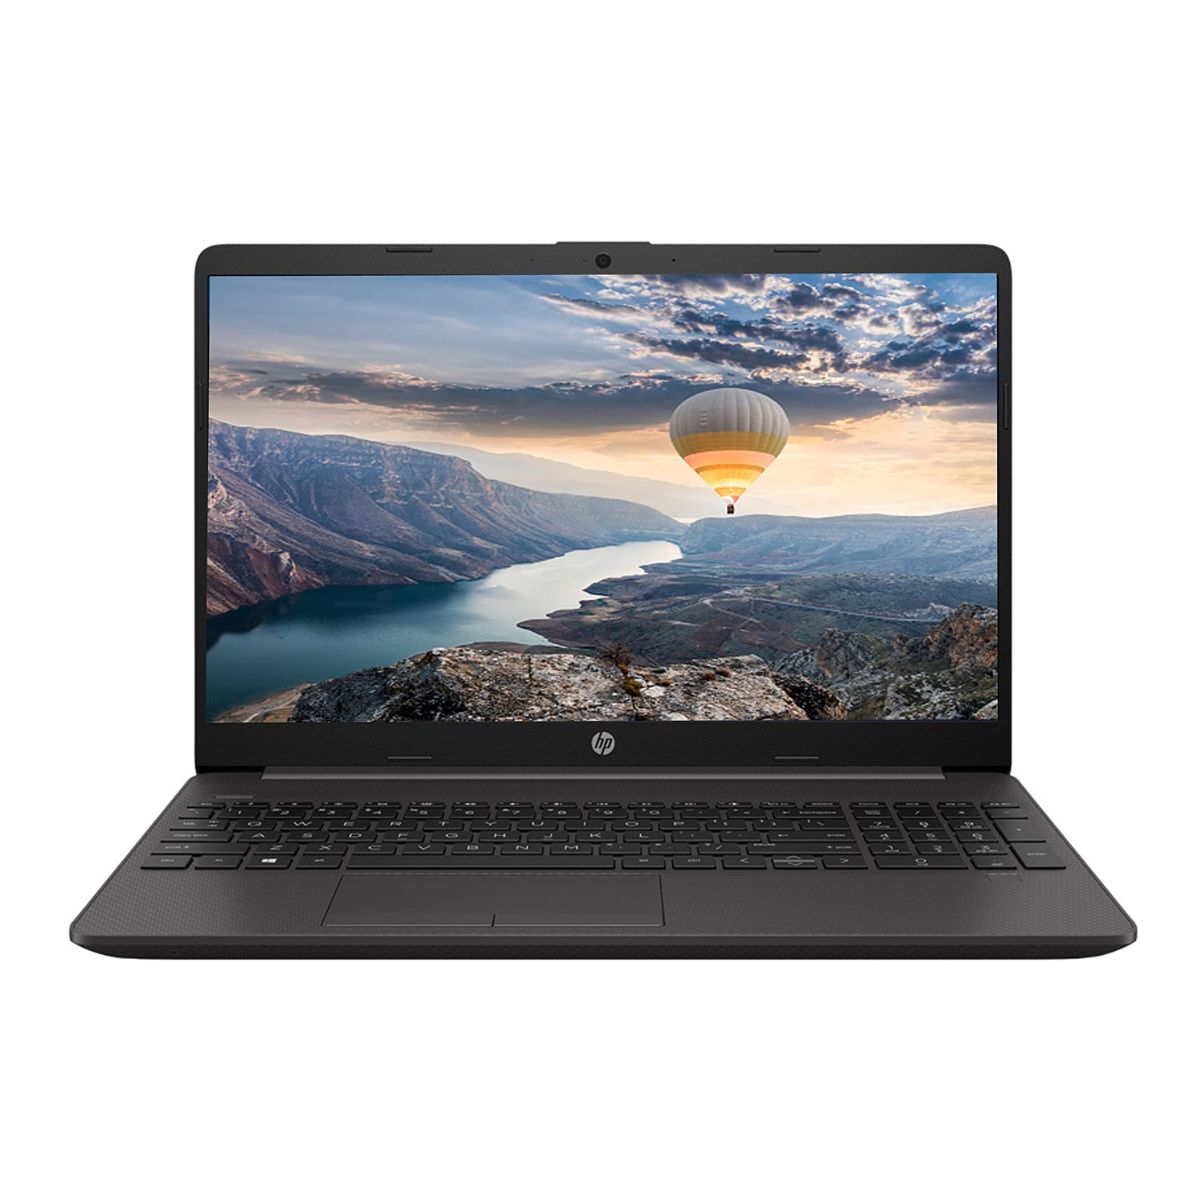 Hp 240 G8 - Intel i3 - RAM 16GB 512GB SSD - Window 11(With Free Accessories - Bag, Mouse, Card Reader and Mousepad) - Black